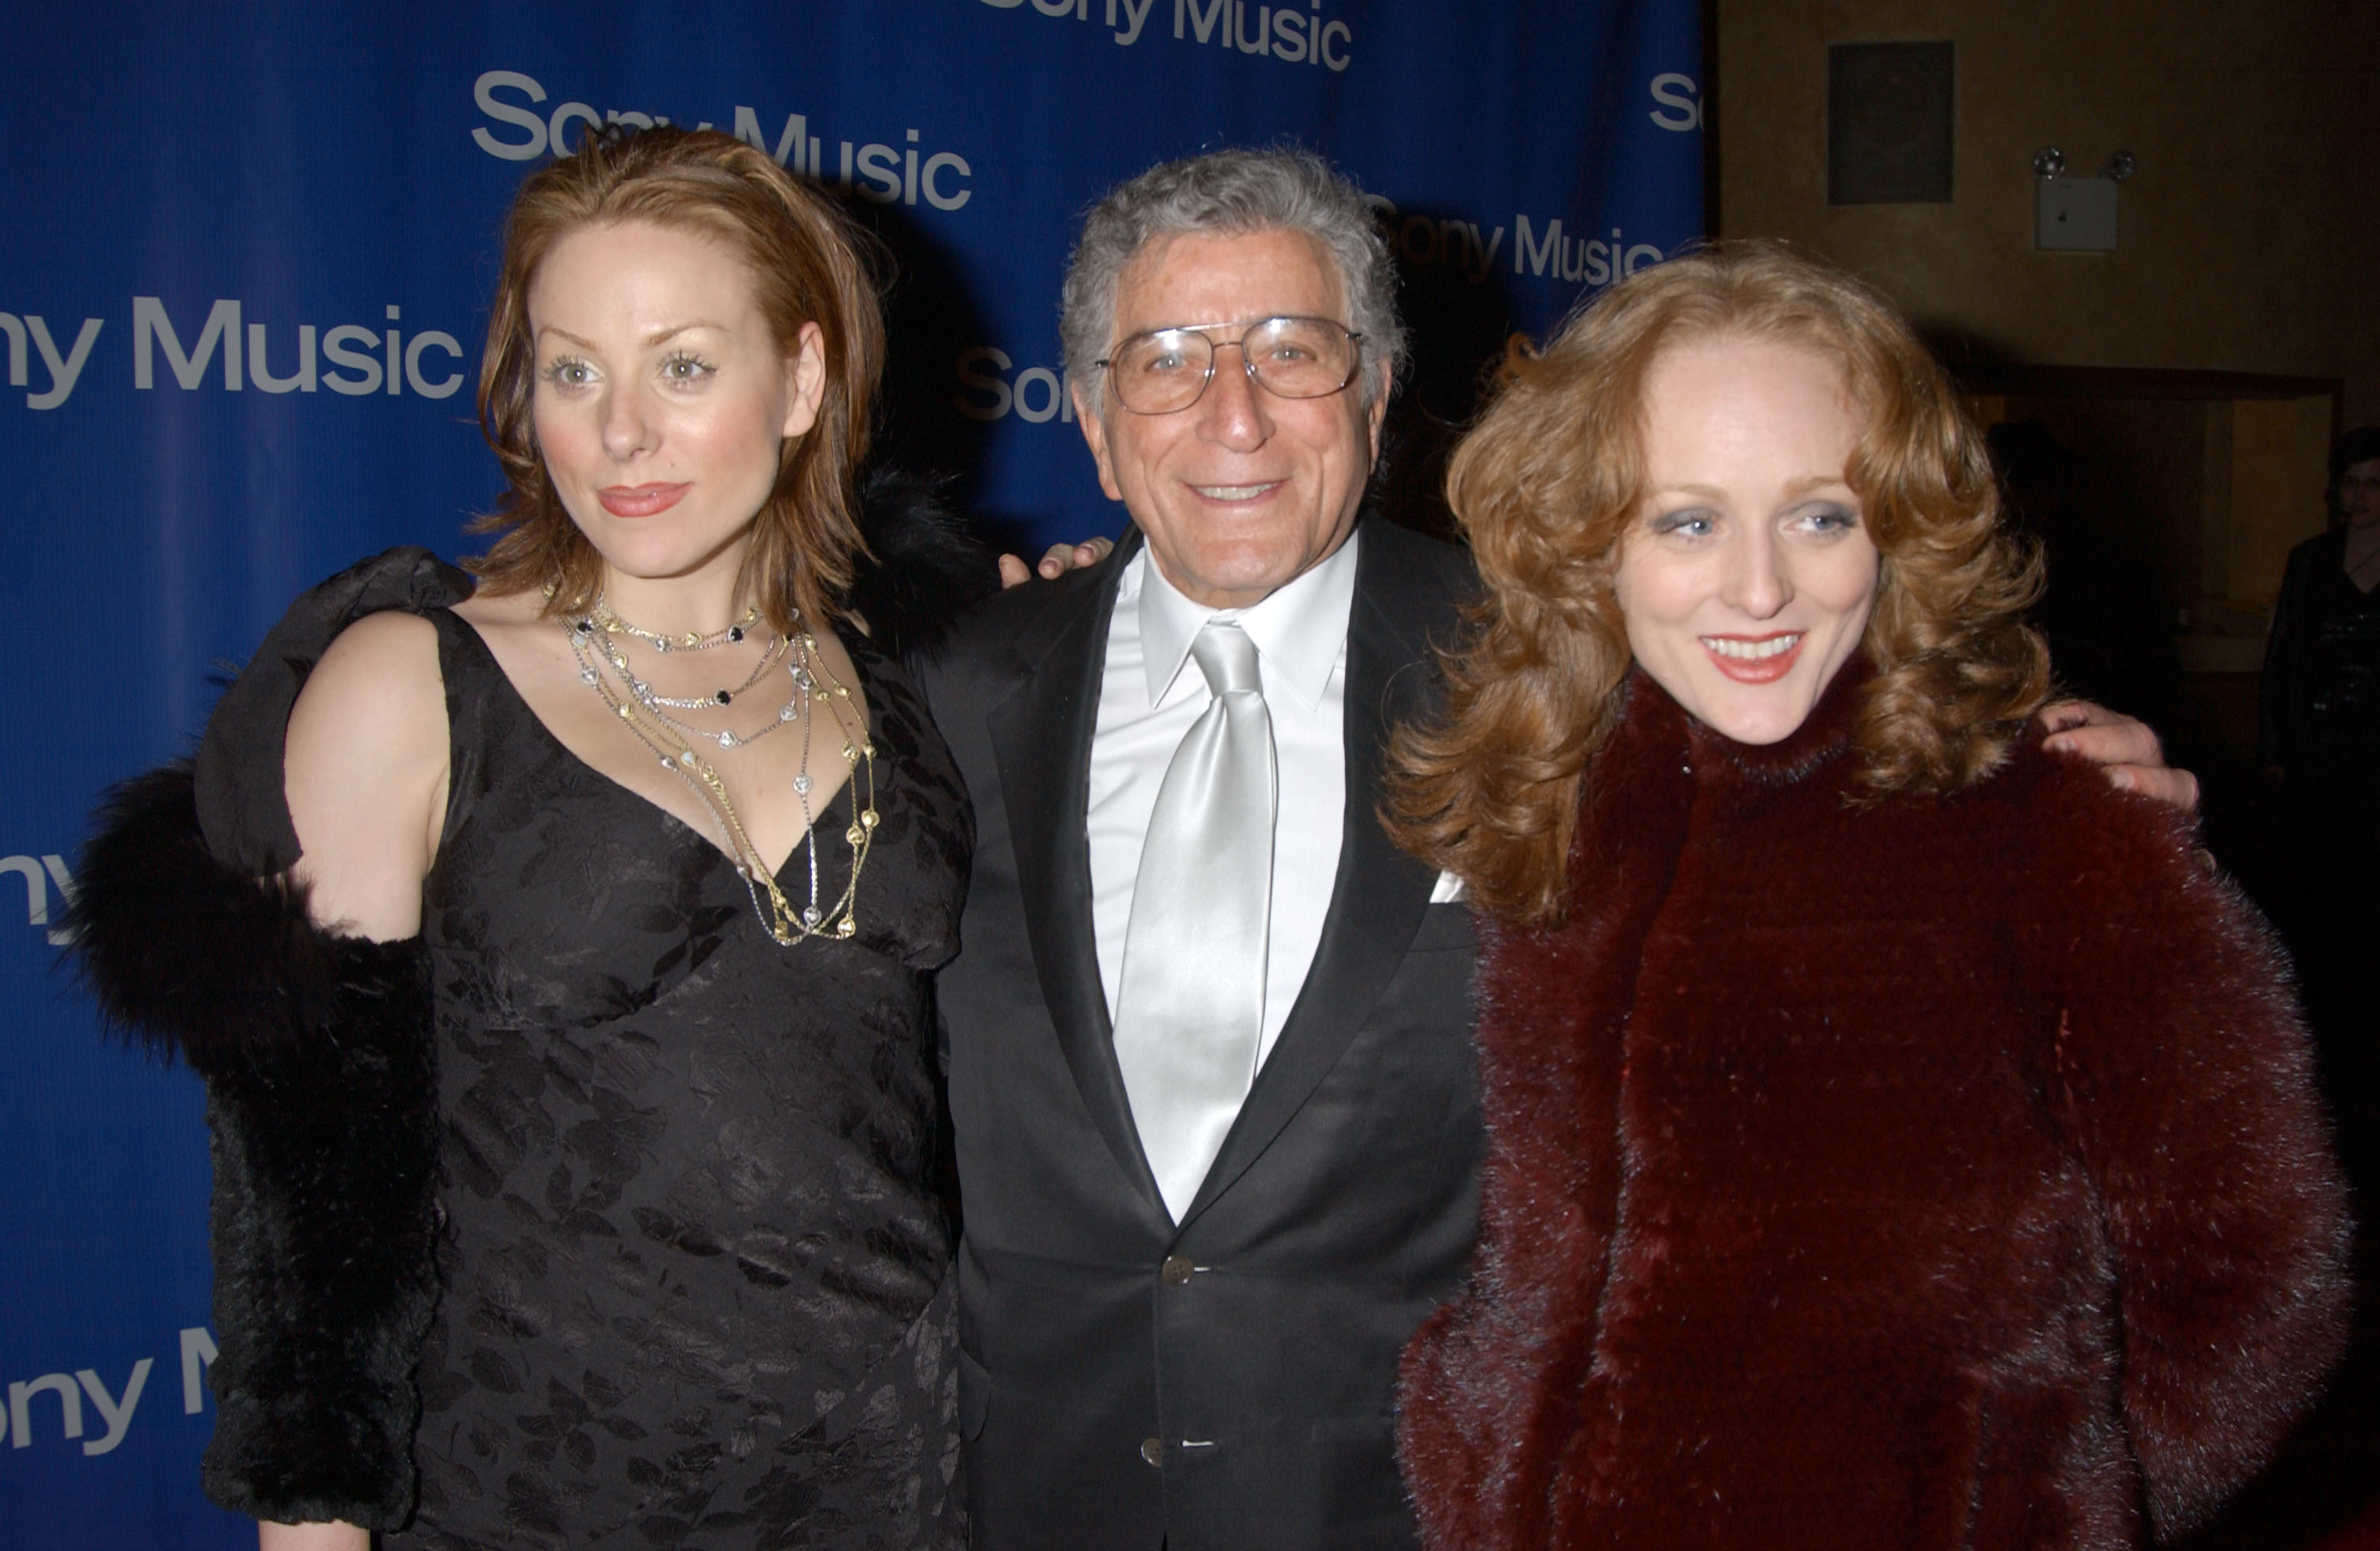 Joanna, Tony, and Antonia Bennett at a post Grammy party on February 23, 2003, in New York. | Source: Getty Images